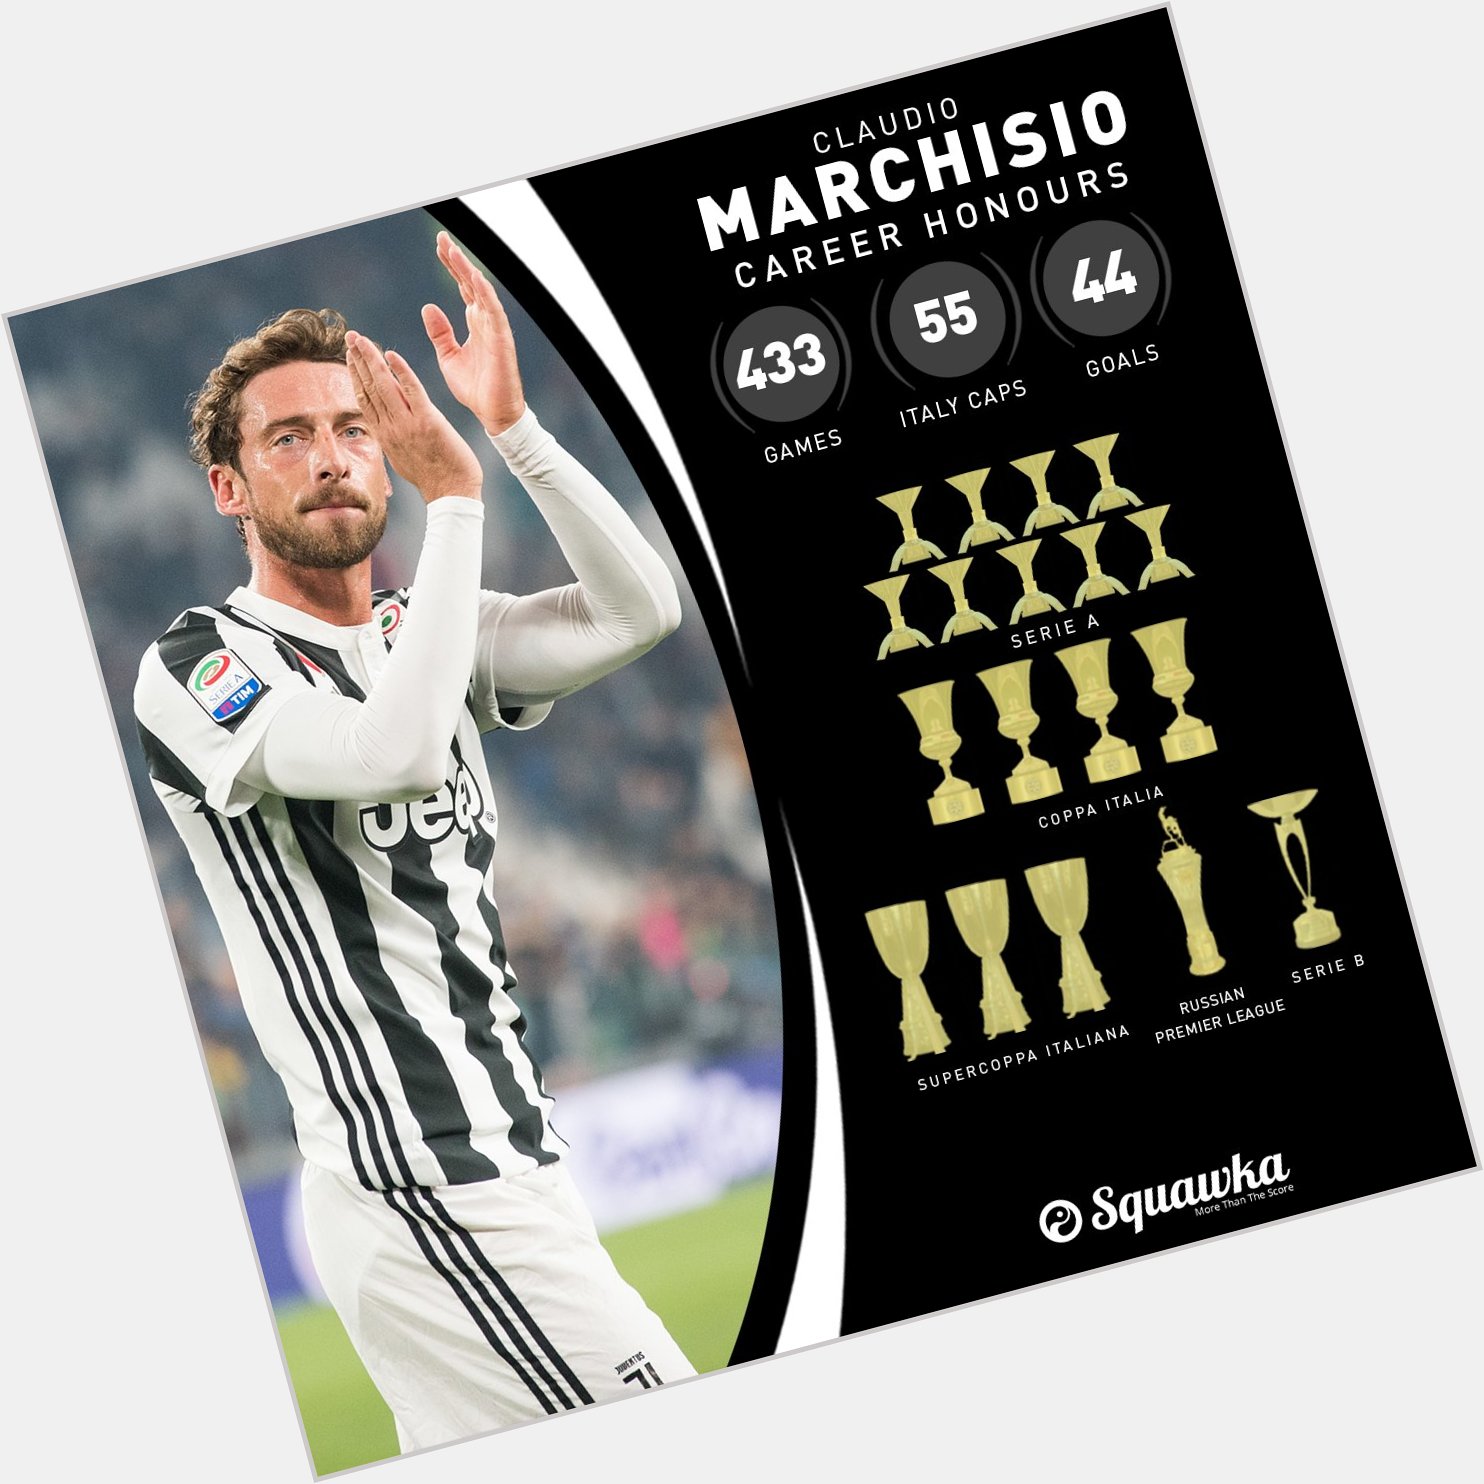 Happy 34th birthday, Claudio Marchisio: 433 games  55 caps  44 goals 18 trophies

Buon Compleanno. 